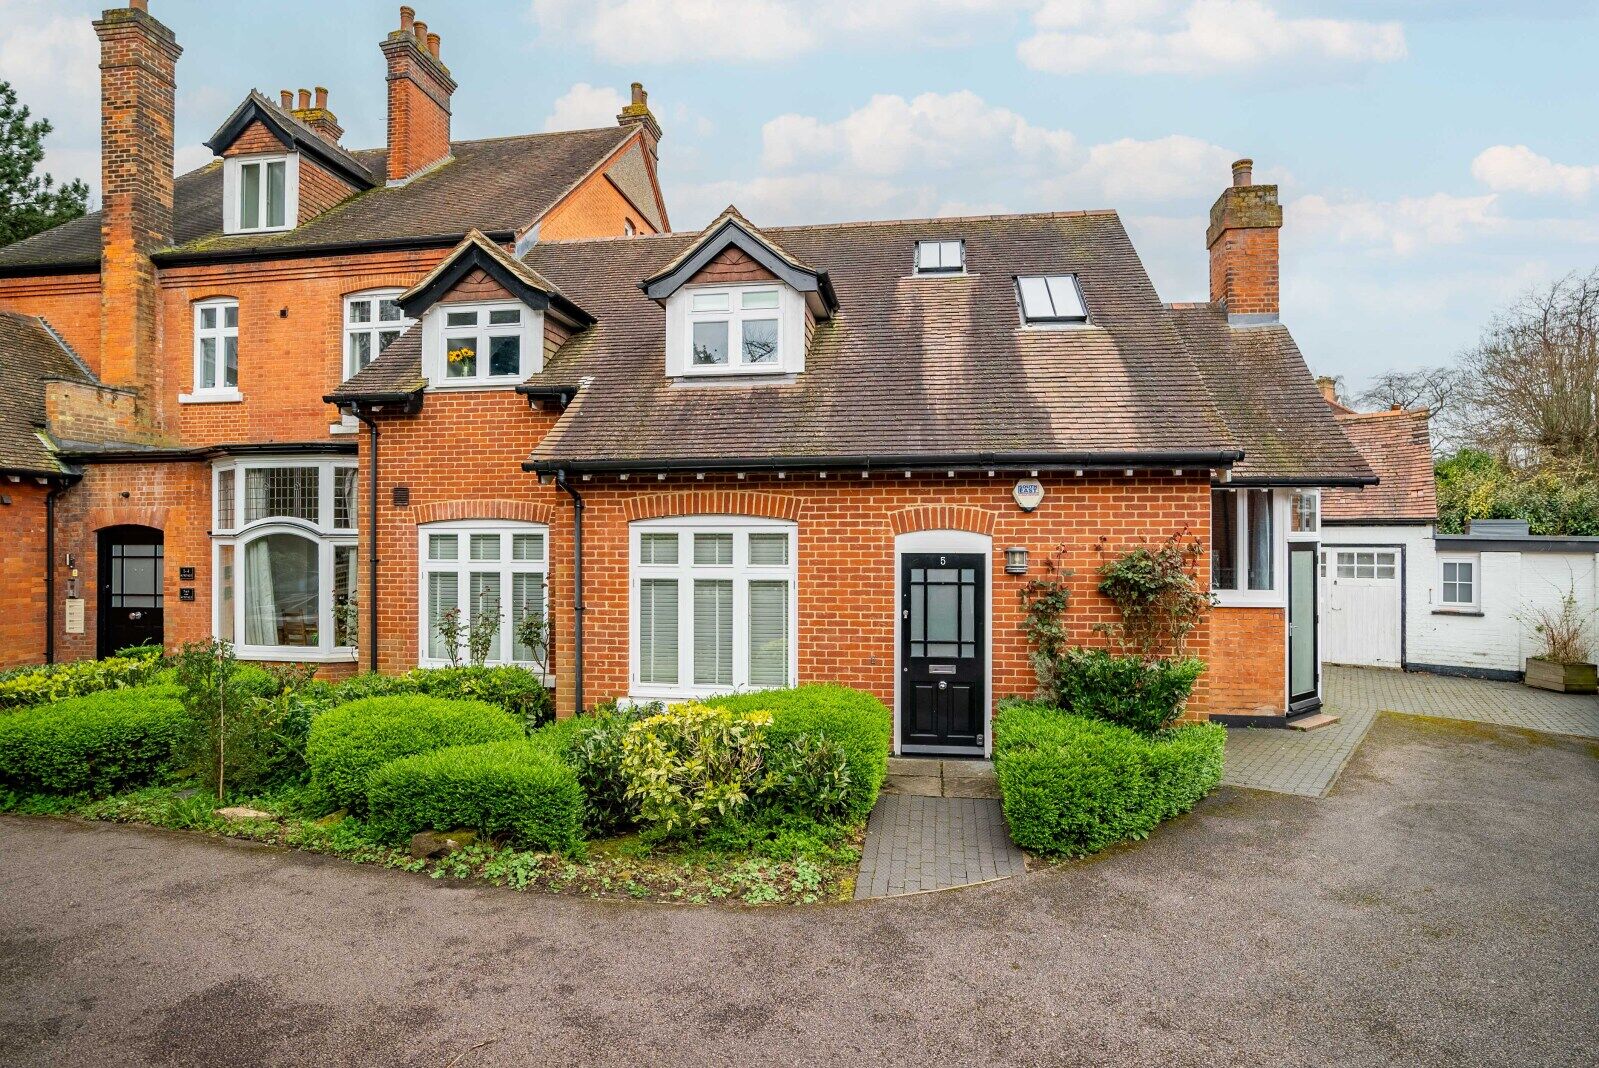 2 bedroom  flat to rent, Available unfurnished now Althorp Road, St. Albans, AL1, main image